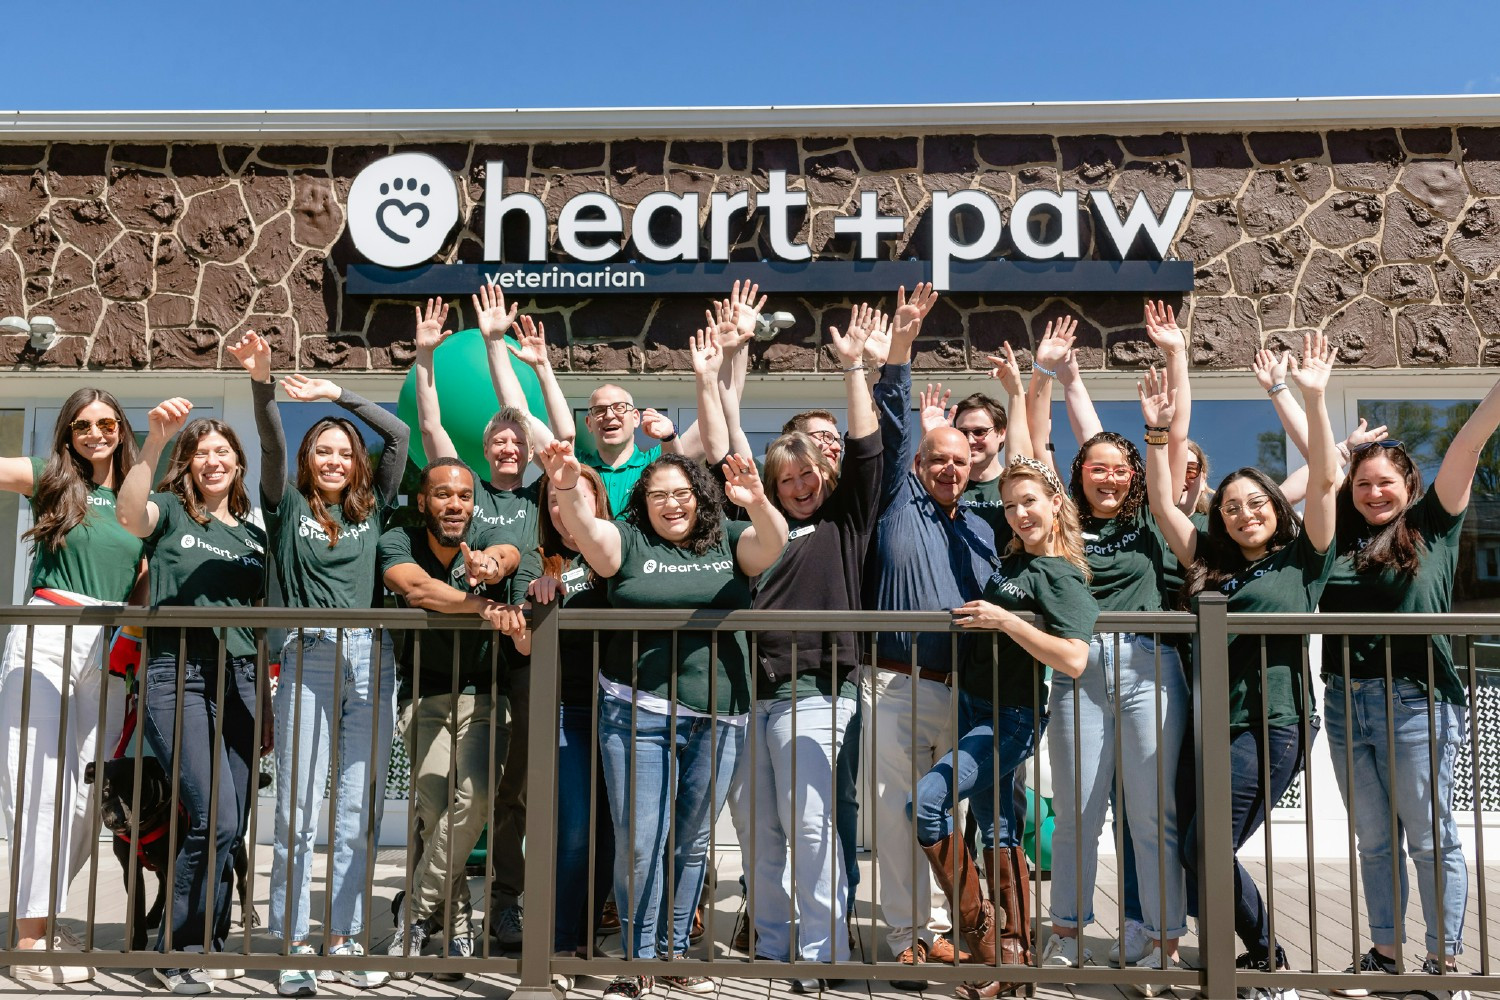 Heart + Paw team members gather at a block party during the 2022 AVMA Convention in Philadelphia